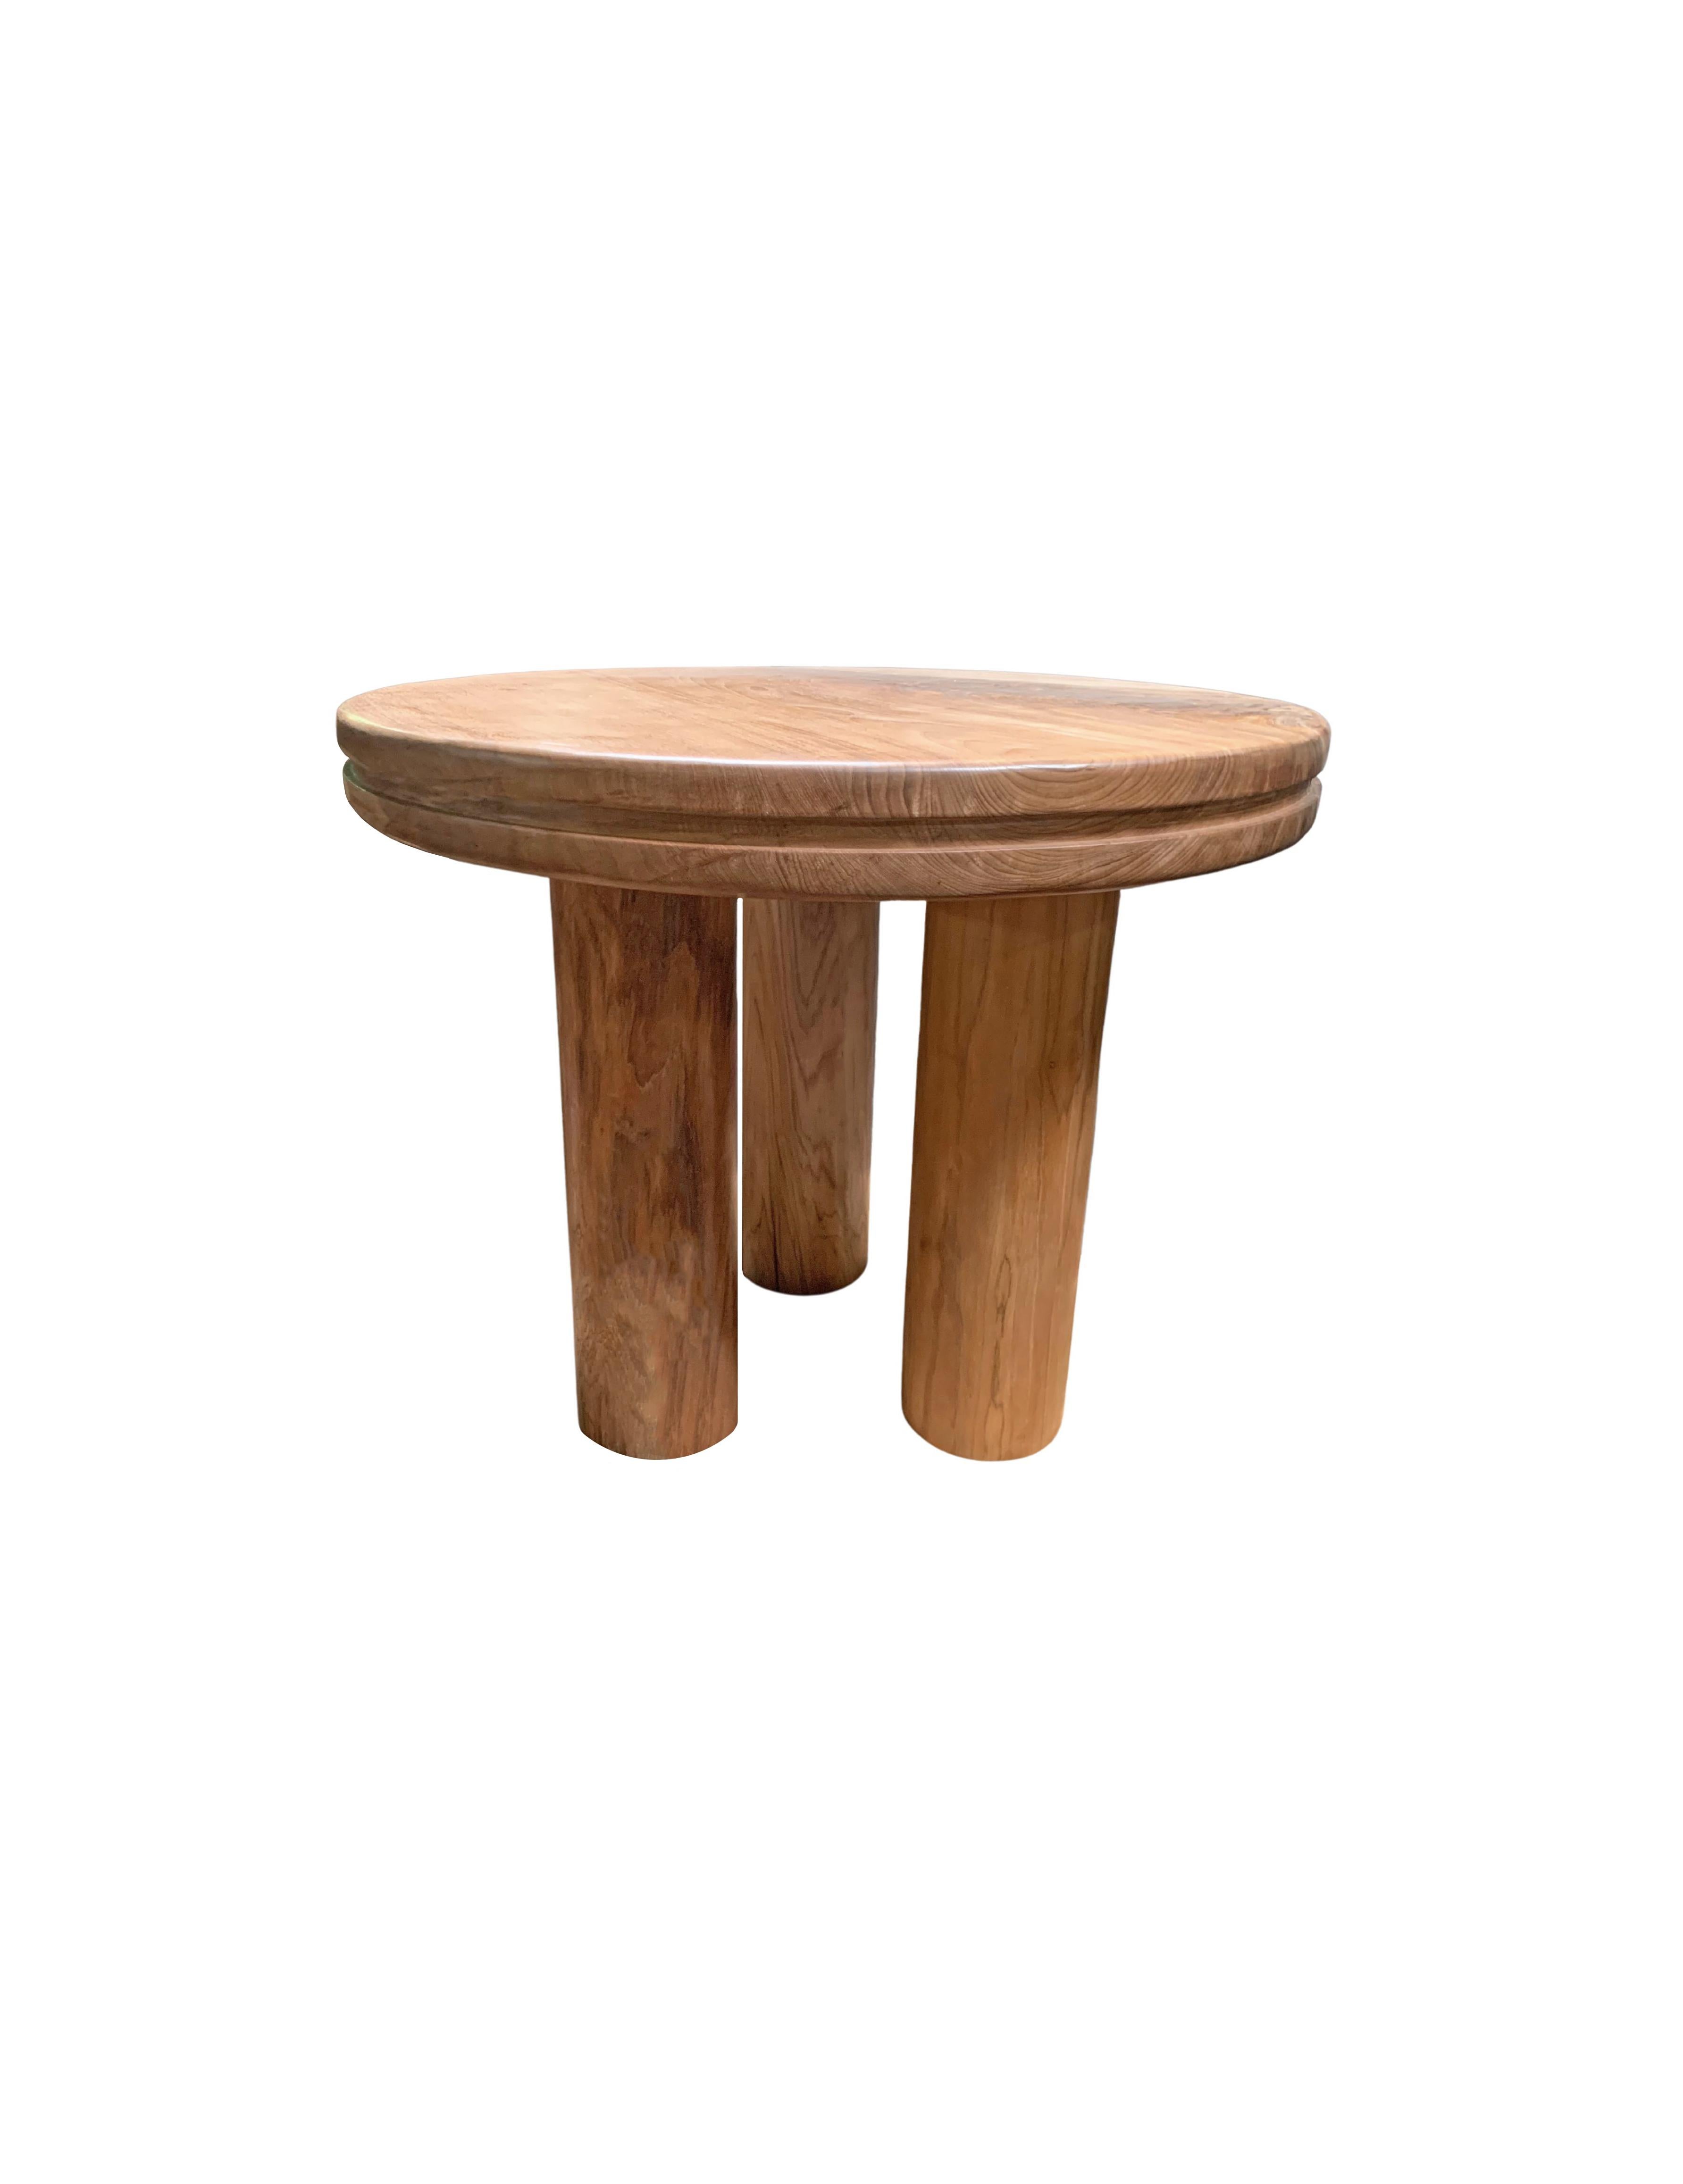 Organic Modern Sculptural Solid Teak Wood Round Table  For Sale